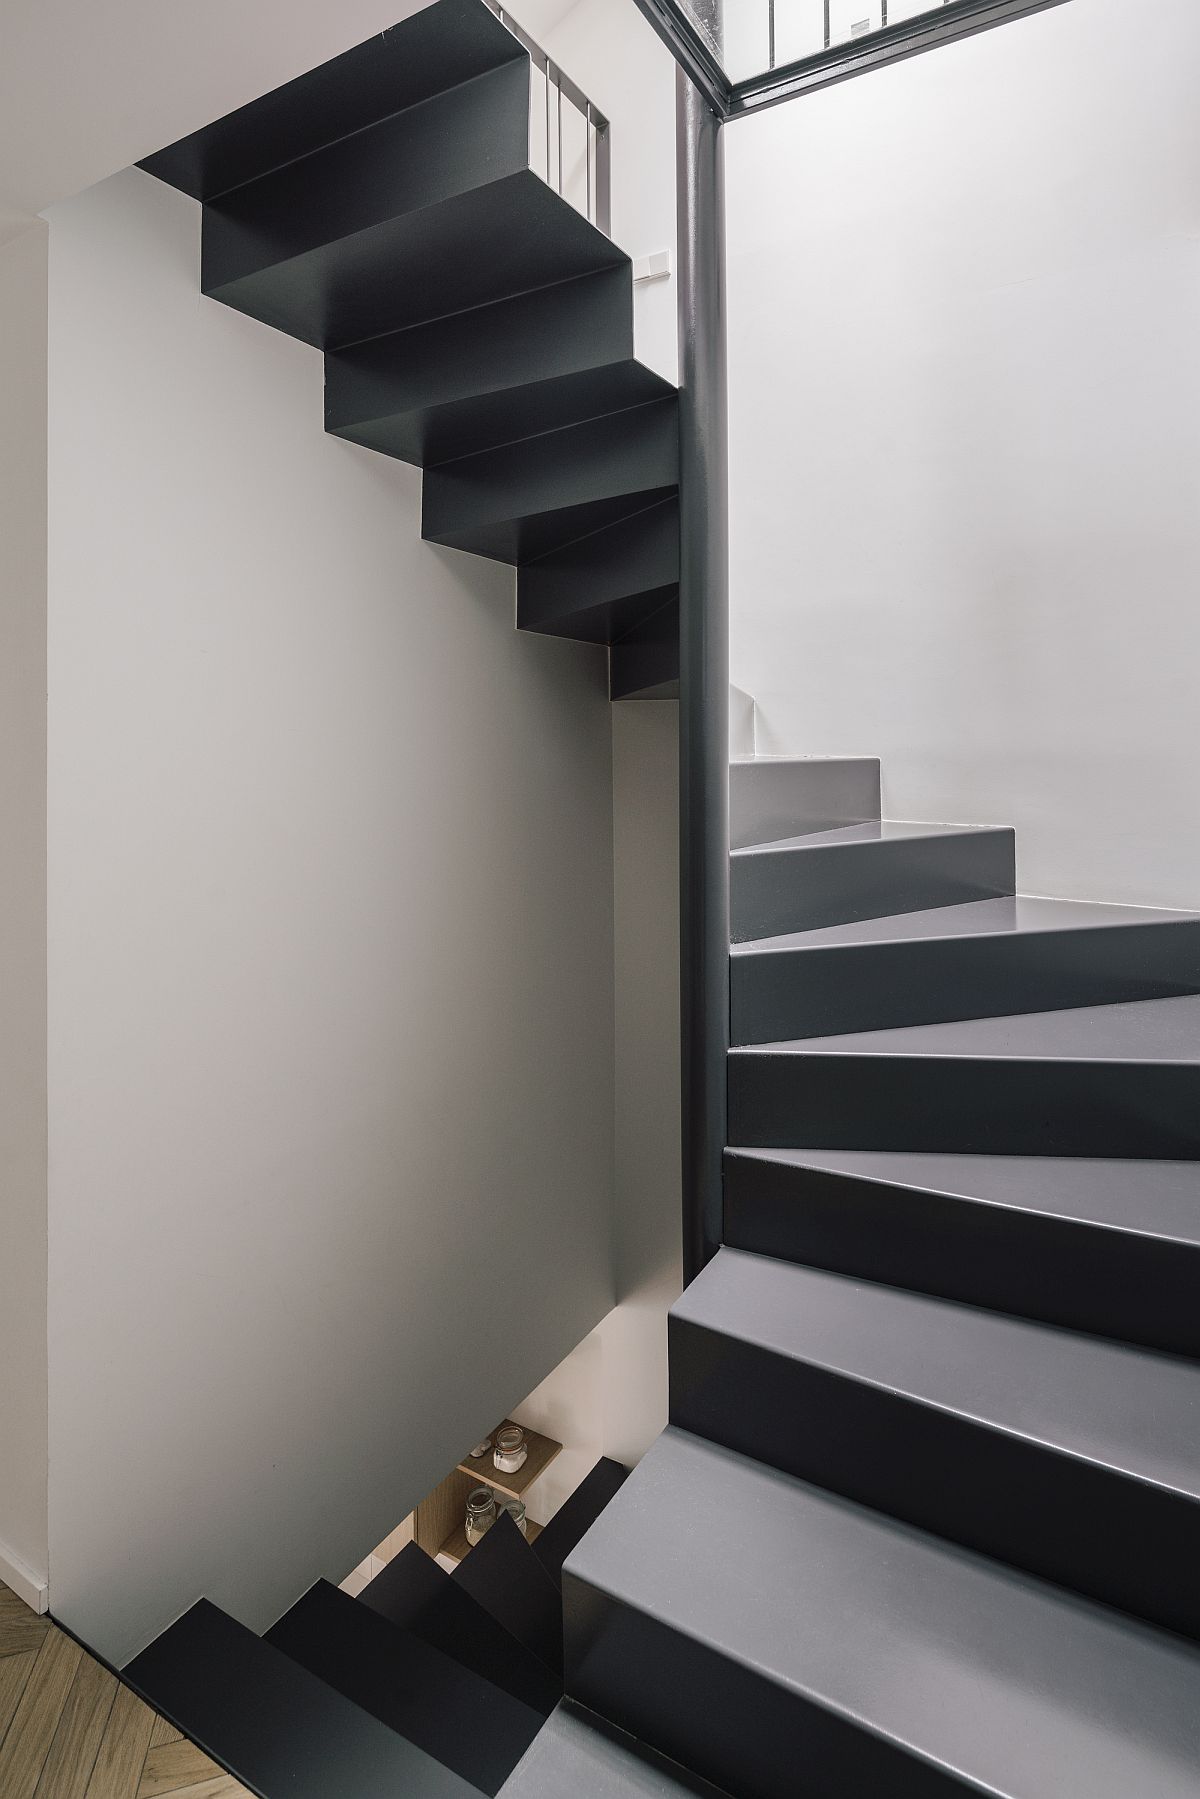 Lovely-and-space-savvy-staircase-in-gray-and-white-connects-the-variors-levels-inside-the-house-49321